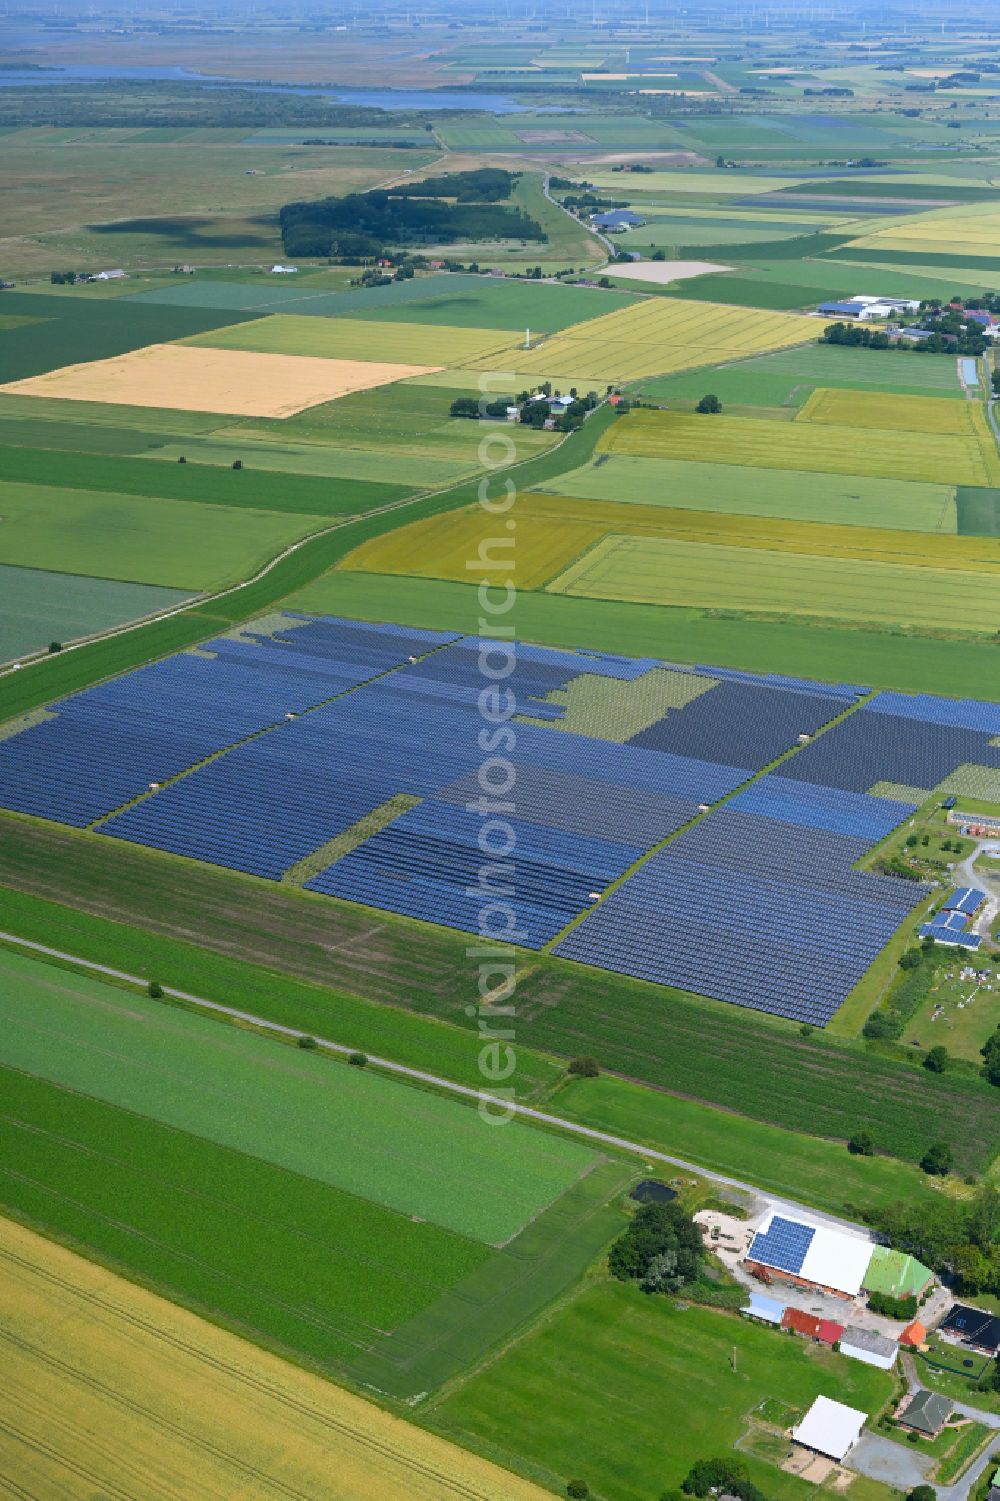 Busenwurth from above - Panel rows of a solar power plant and photovoltaic system of the PV Betriebs Waste to Energy A UG & Co. KG in a field on the Alte Landstrasse in Busenwurth in the state Schleswig-Holstein, Germany